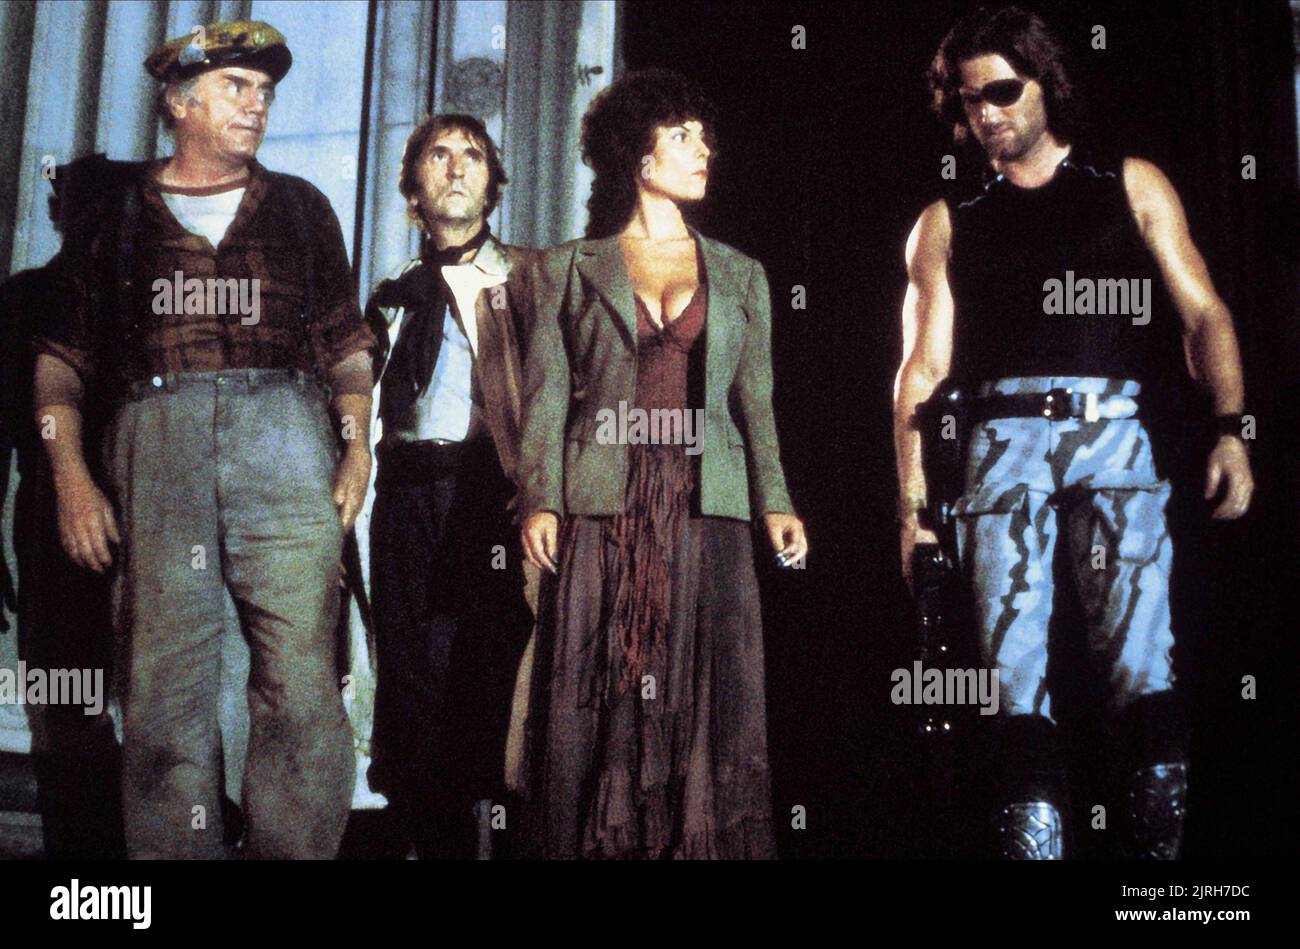 ERNEST BORGNINE, HARRY DEAN STANTON, ADRIENNE BARBEAU, KURT RUSSELL, ESCAPE FROM NEW YORK, 1981 Stock Photo